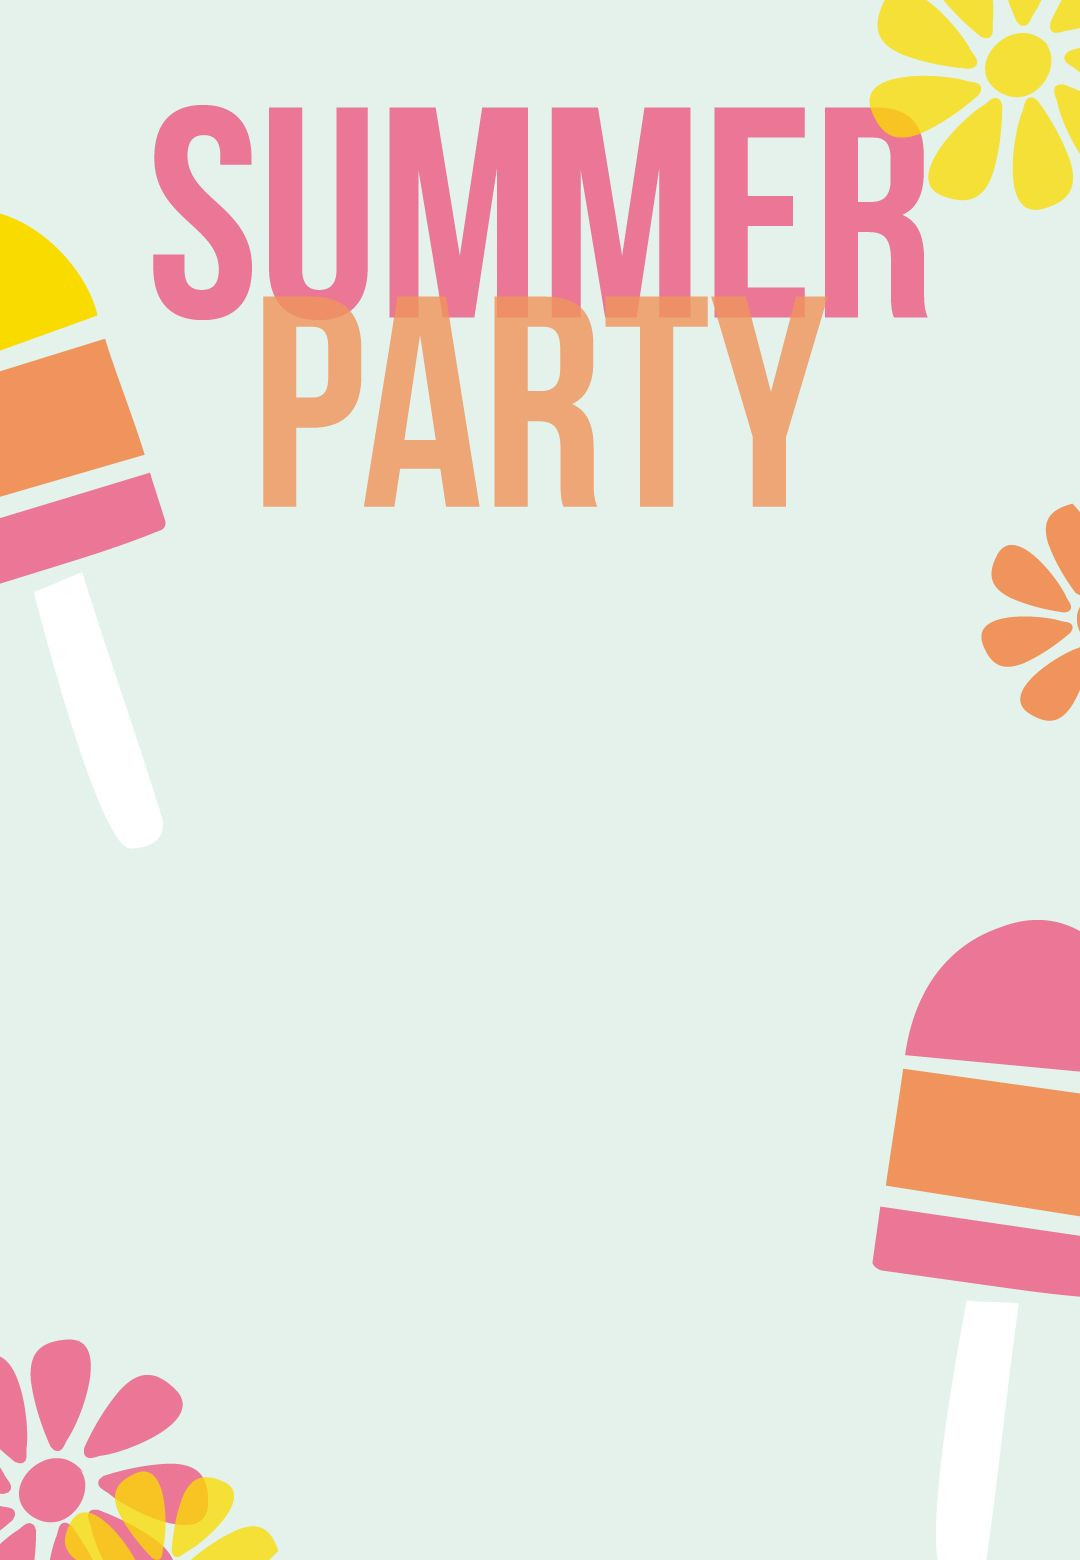 Summer Party Invitation Ideas
 Summer Party Invitation Free Printable Striped Popsicles